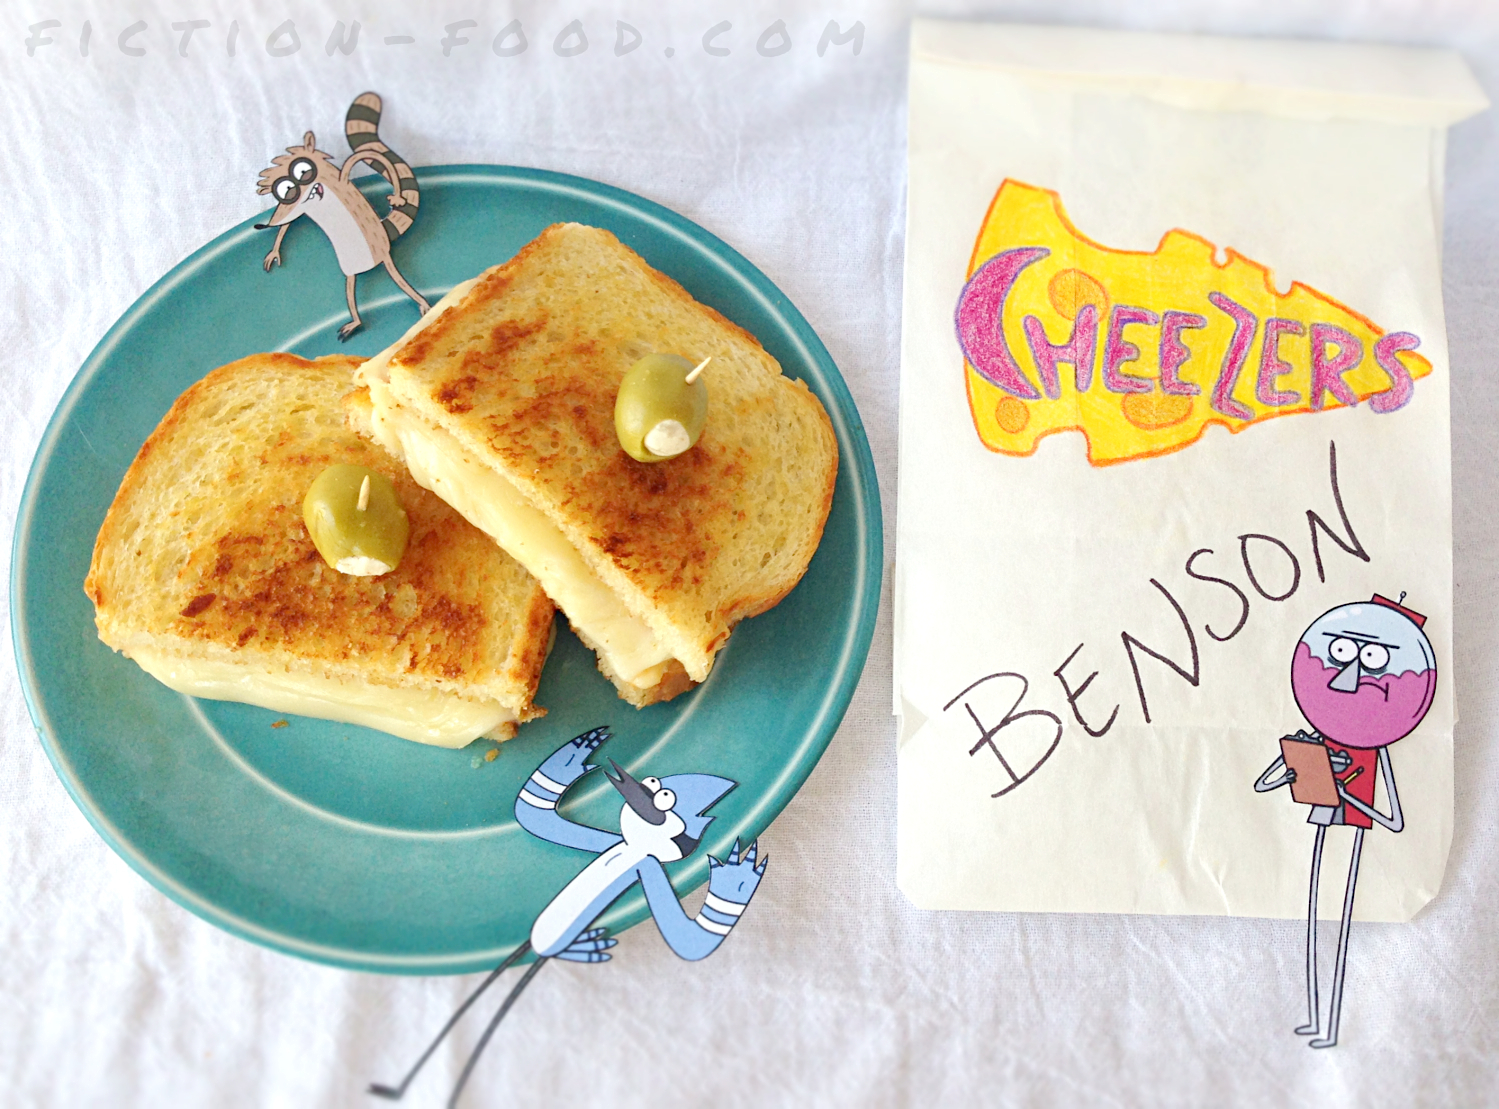 Fiction-Food Café: Grilled Cheese Deluxe from 